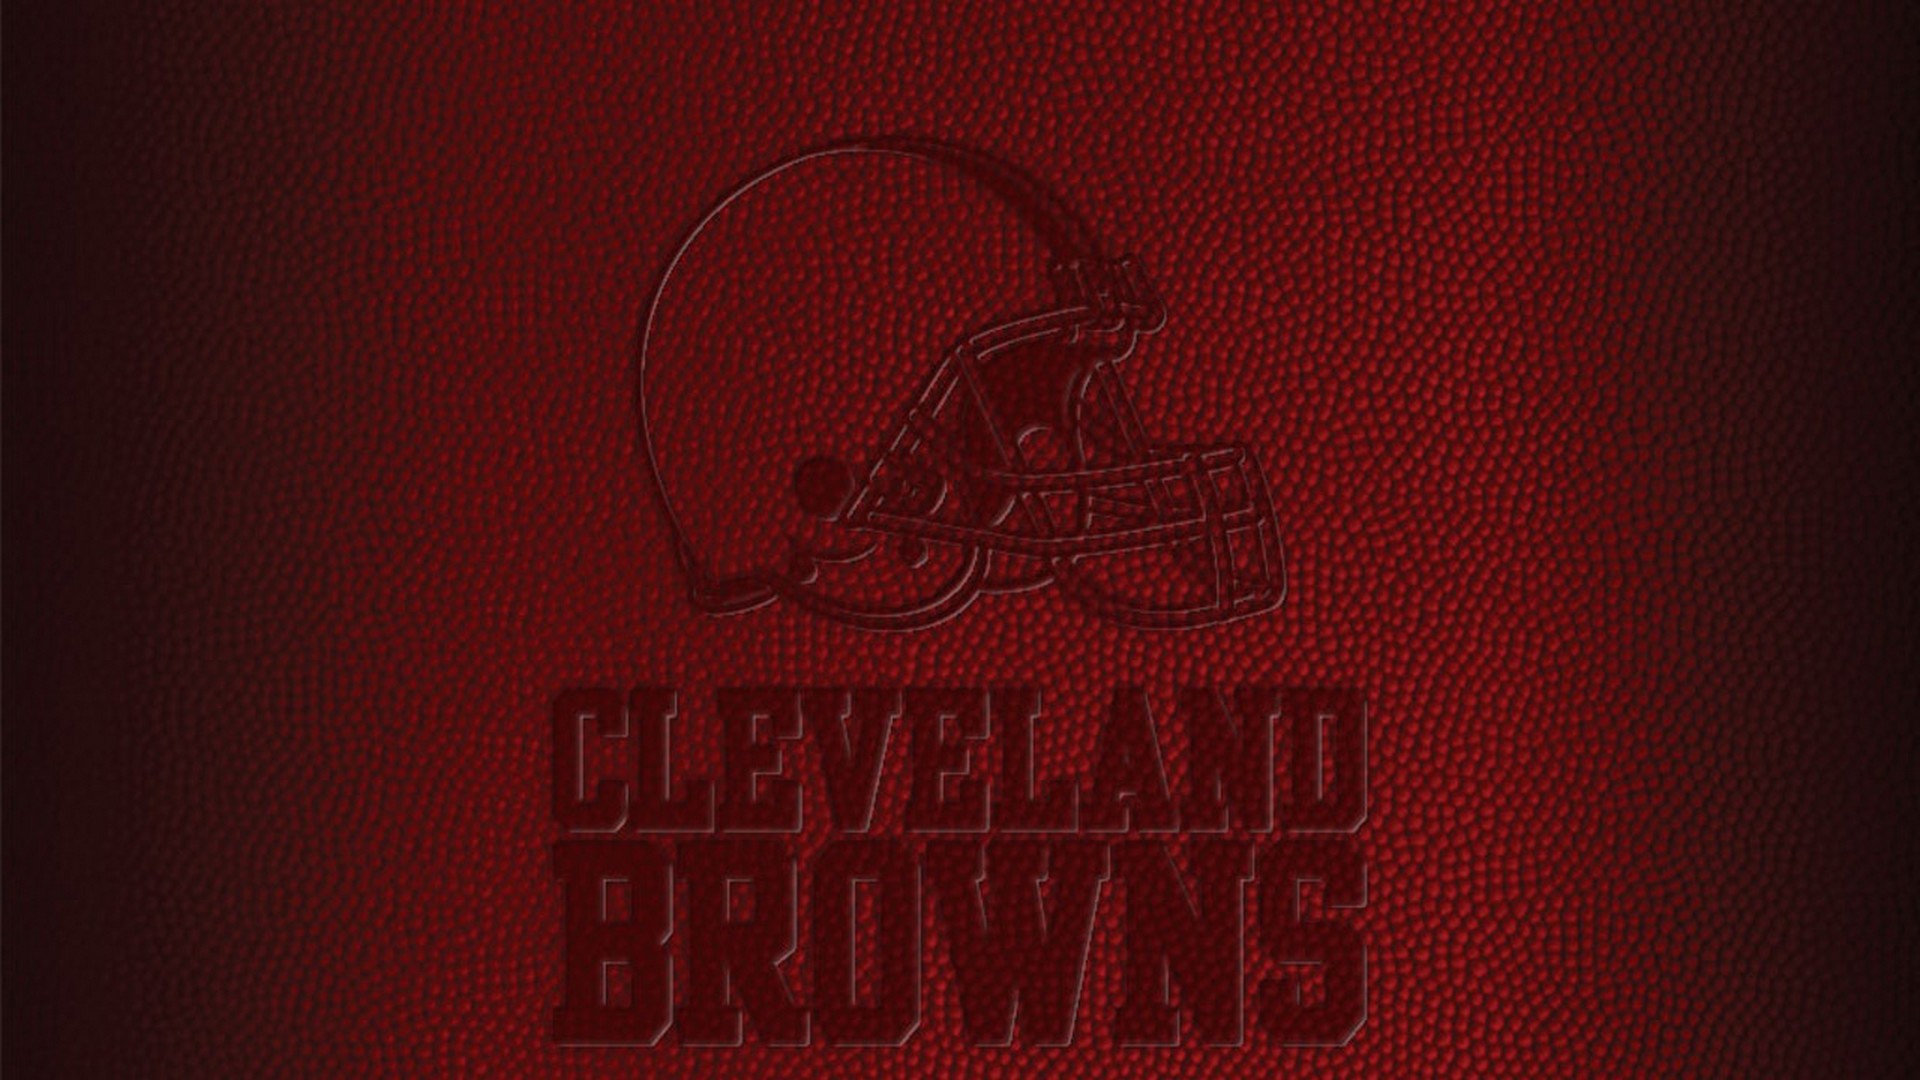 Cleveland Browns Laptop Wallpaper With high-resolution 1920X1080 pixel. Download and set as wallpaper for Desktop Computer, Apple iPhone X, XS Max, XR, 8, 7, 6, SE, iPad, Android